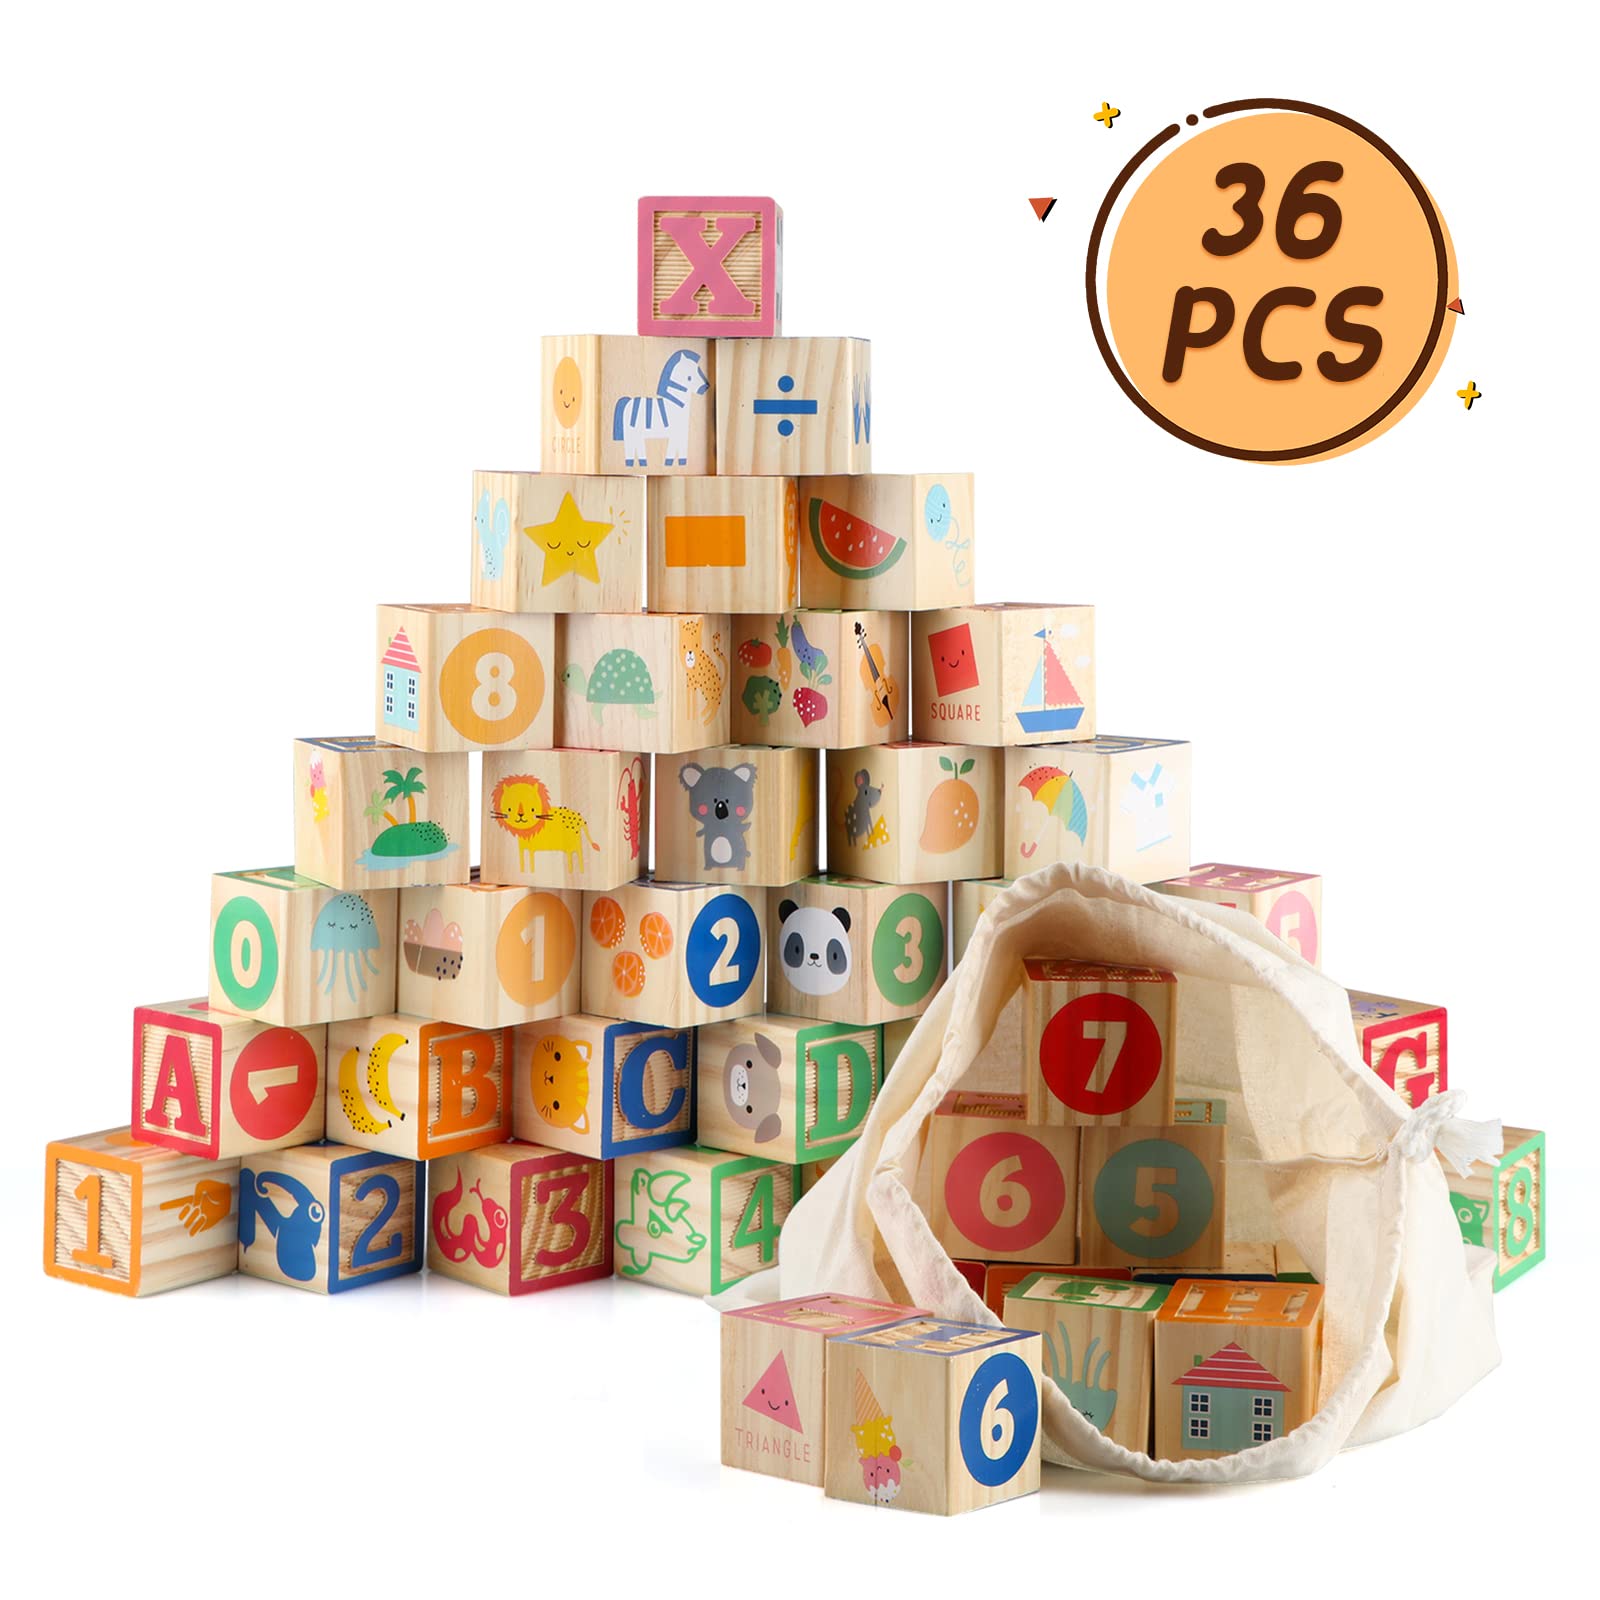 FOPNETS Wooden ABC Building Blocks 36 Large Stacking and Building Blocks for Toddlers Colorful Alphabet Number Icons Preschool Educational Montessori Toys for Boys Girls Gifts